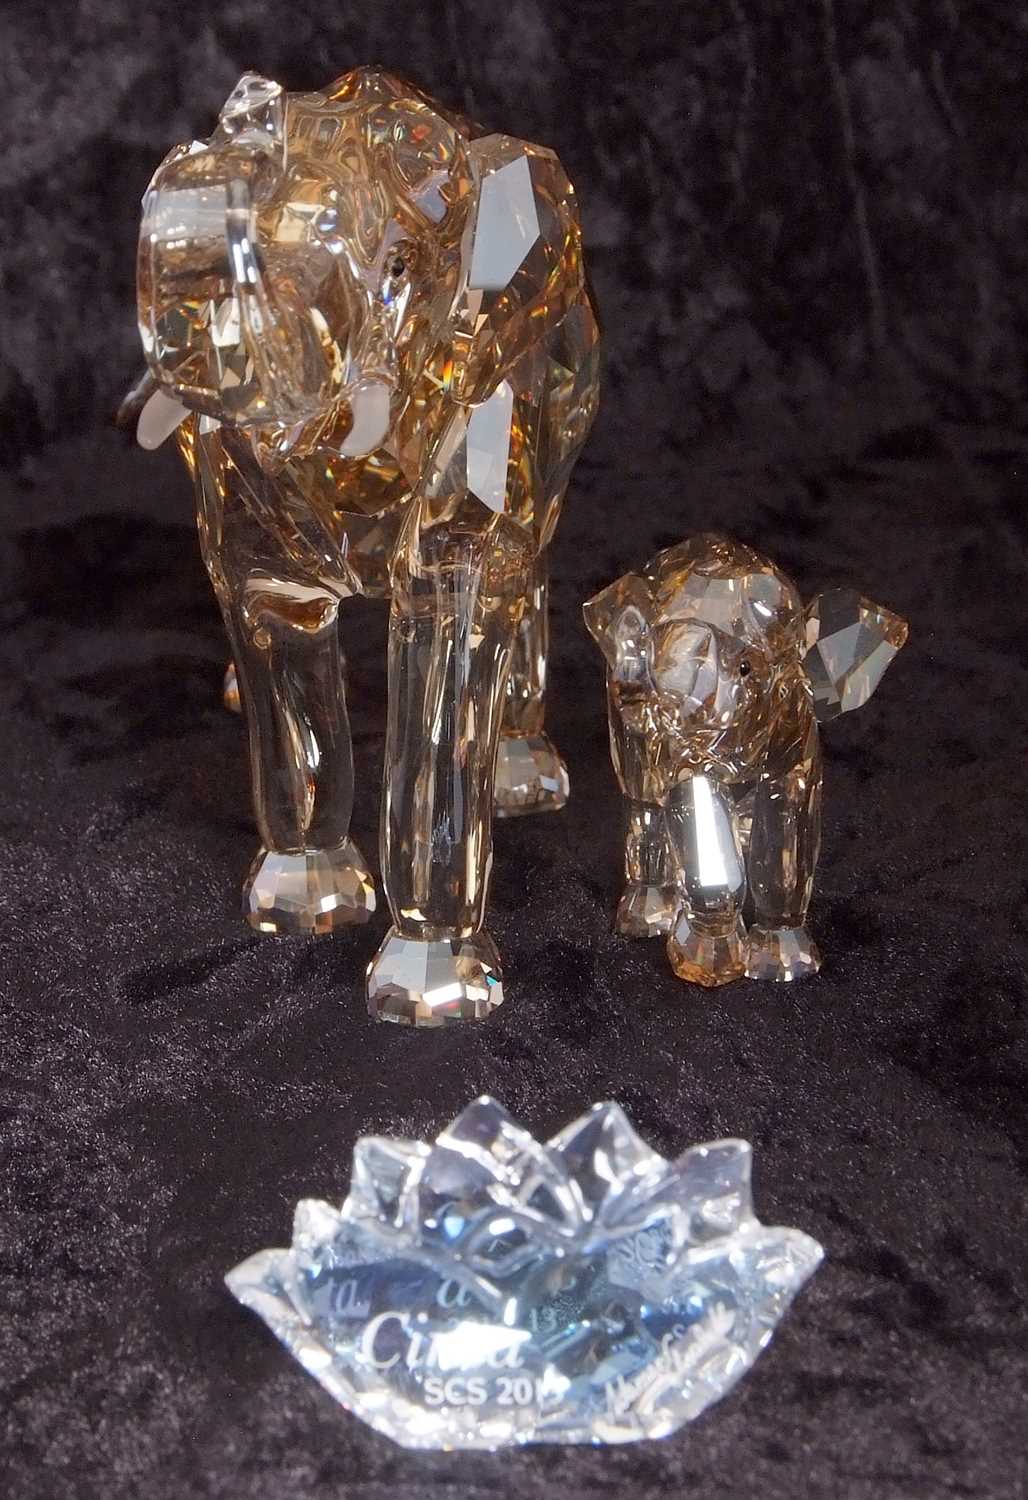 A Swarovski SCS annual edition figure of Cinta elephant together with a baby elephant, 2013, with - Image 9 of 11